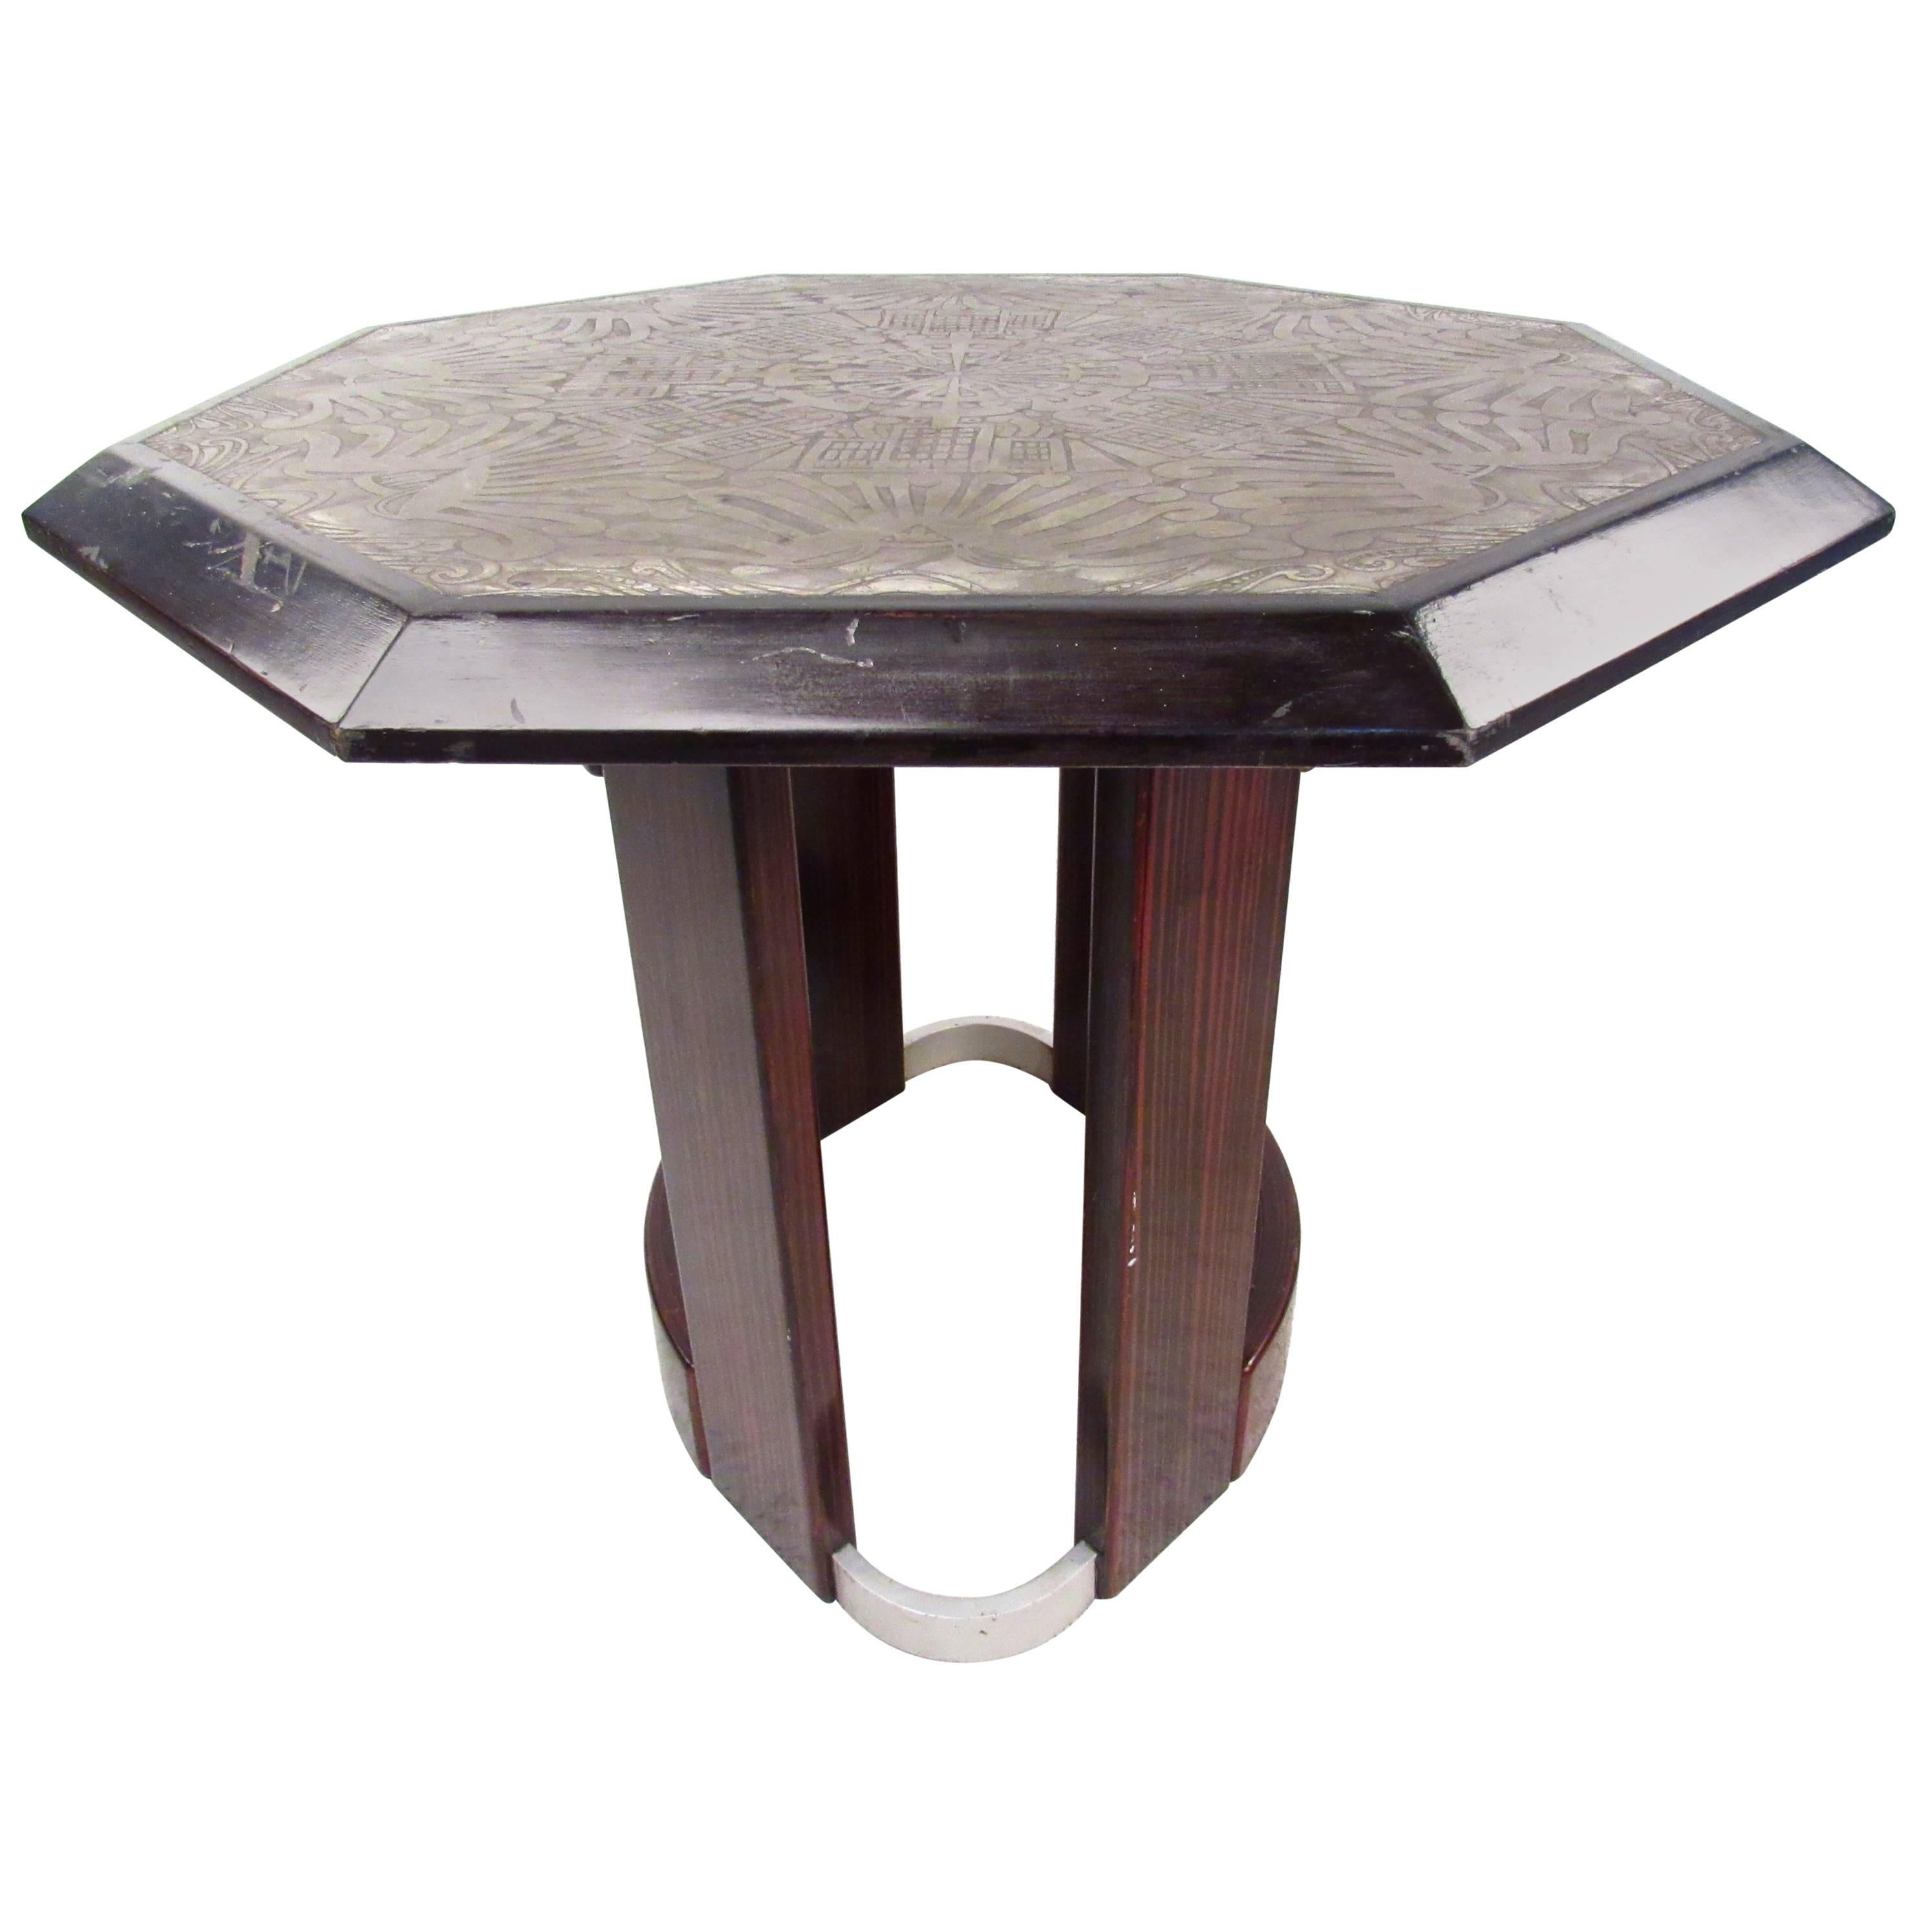 Mid-Century Italian Pedestal Table with Artistic Metal Top